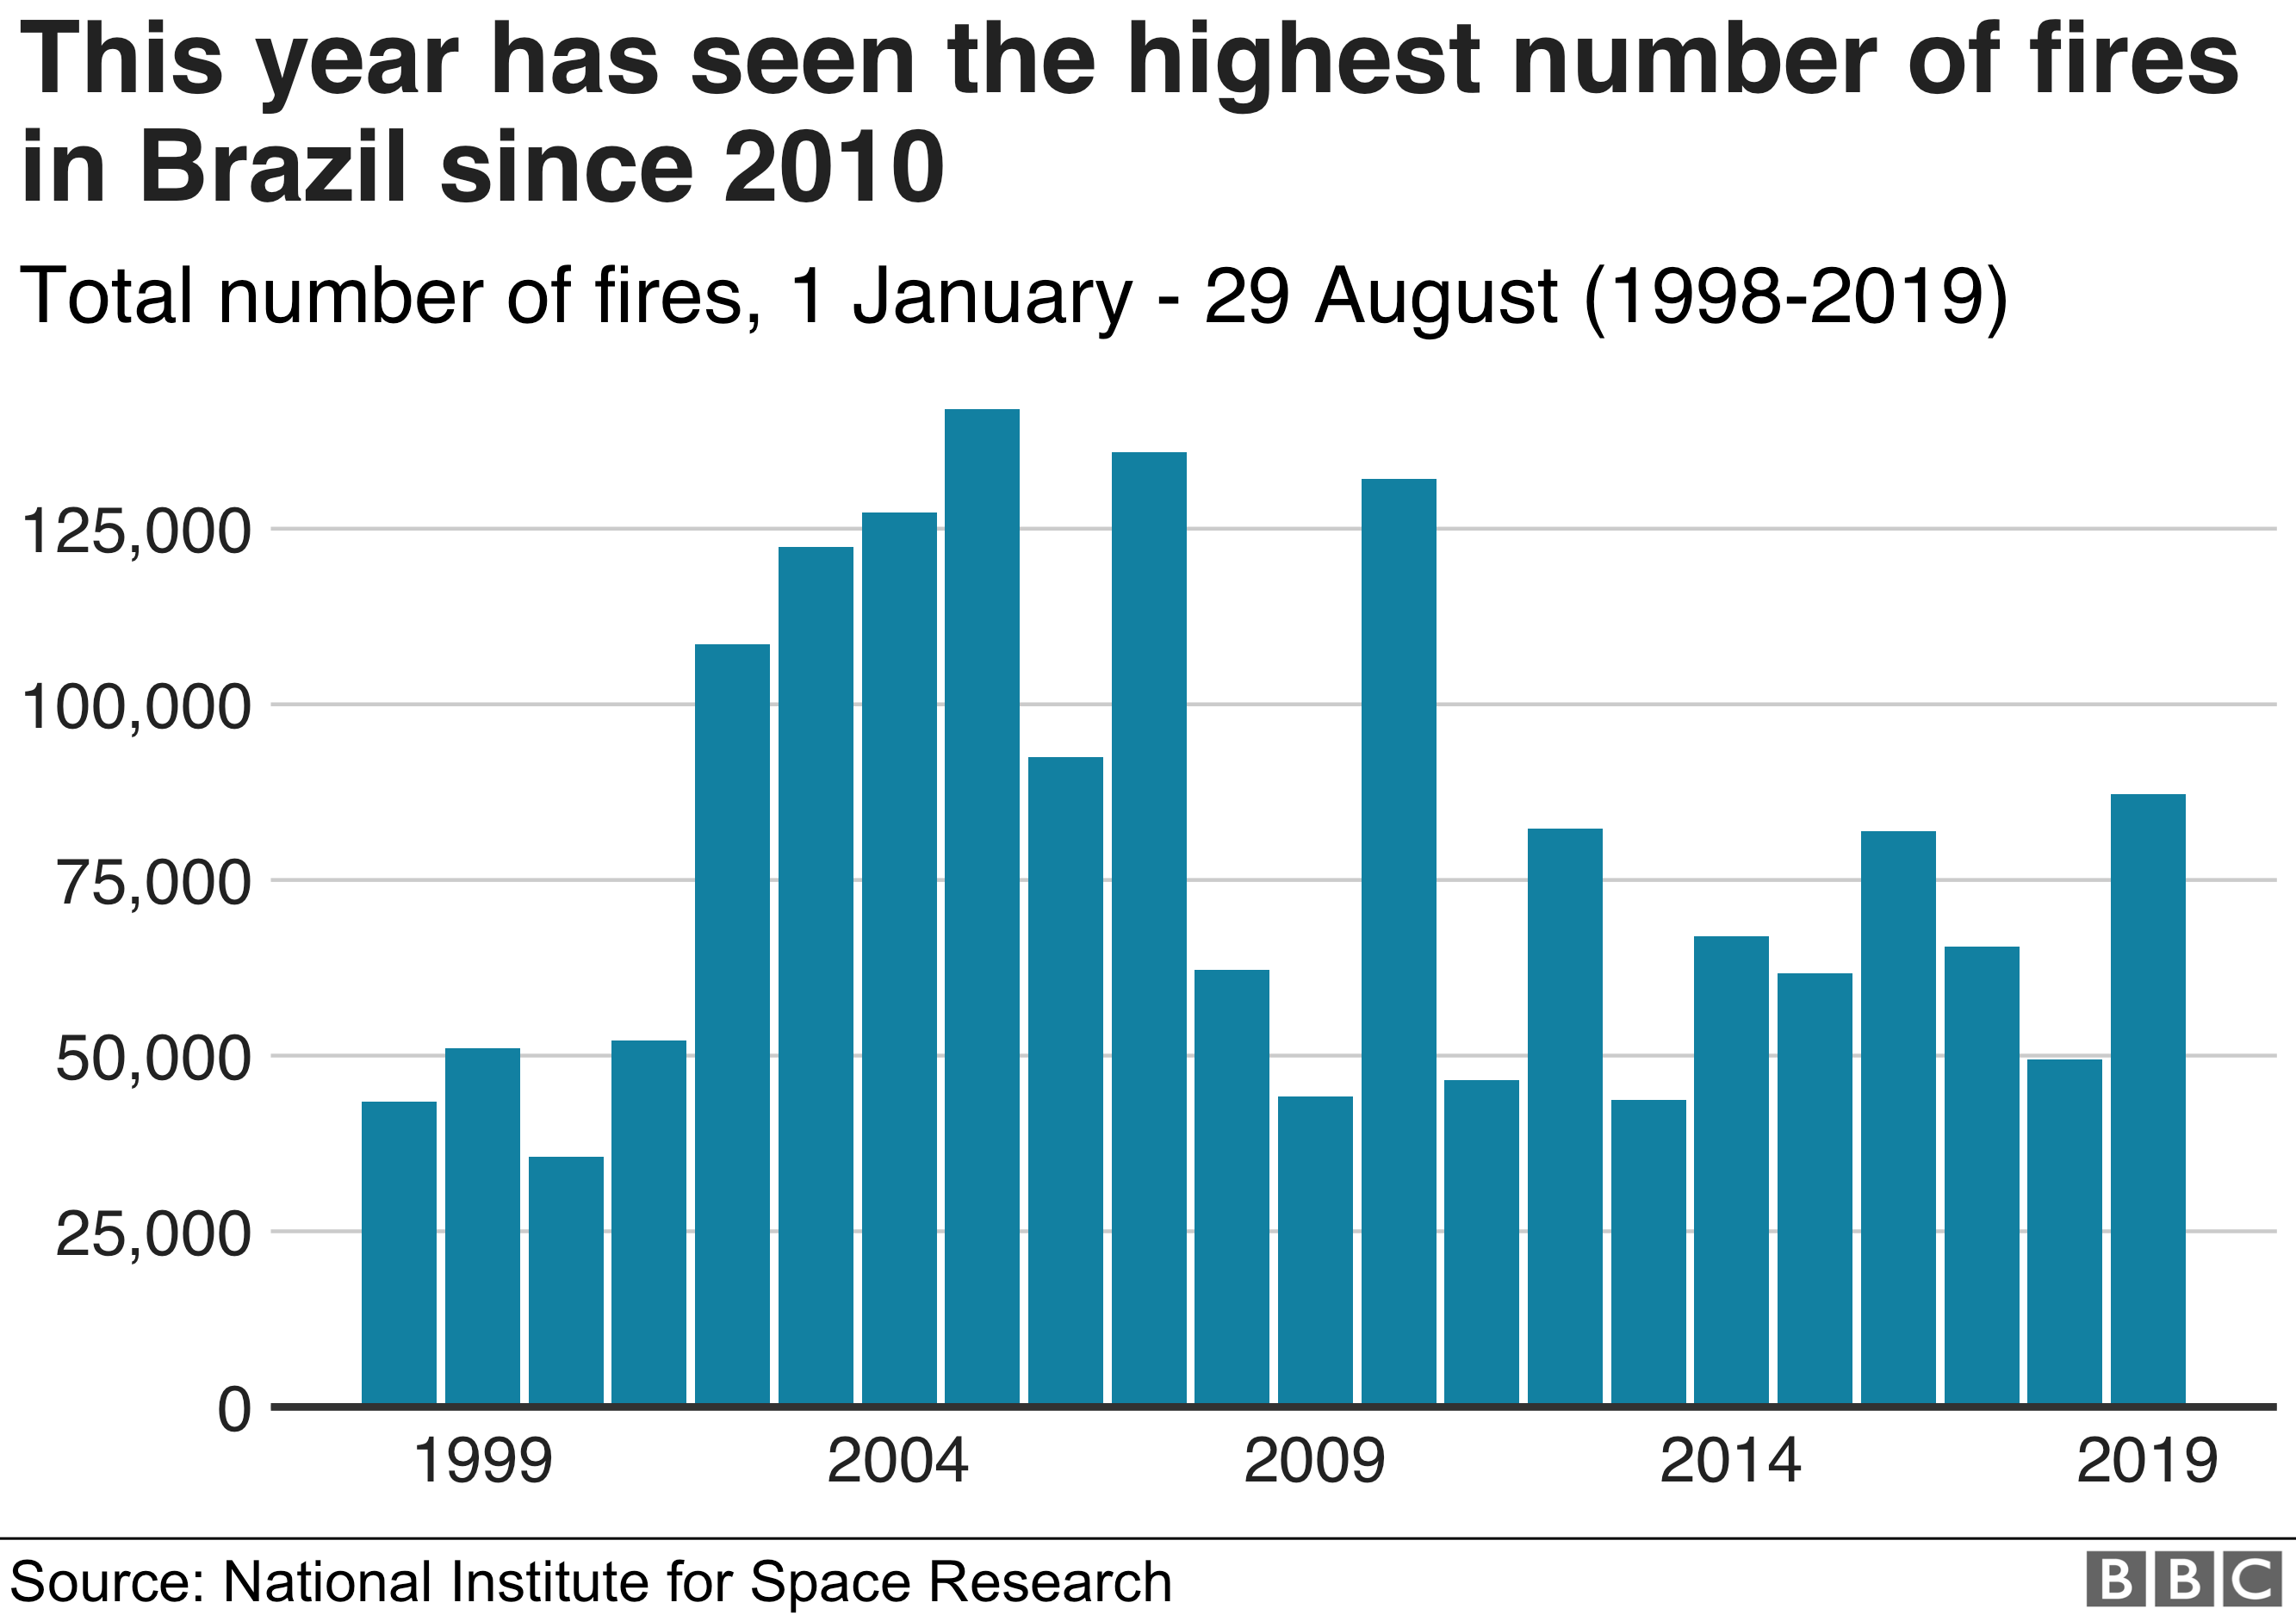 Chart showing the number of fires in Brazil each year